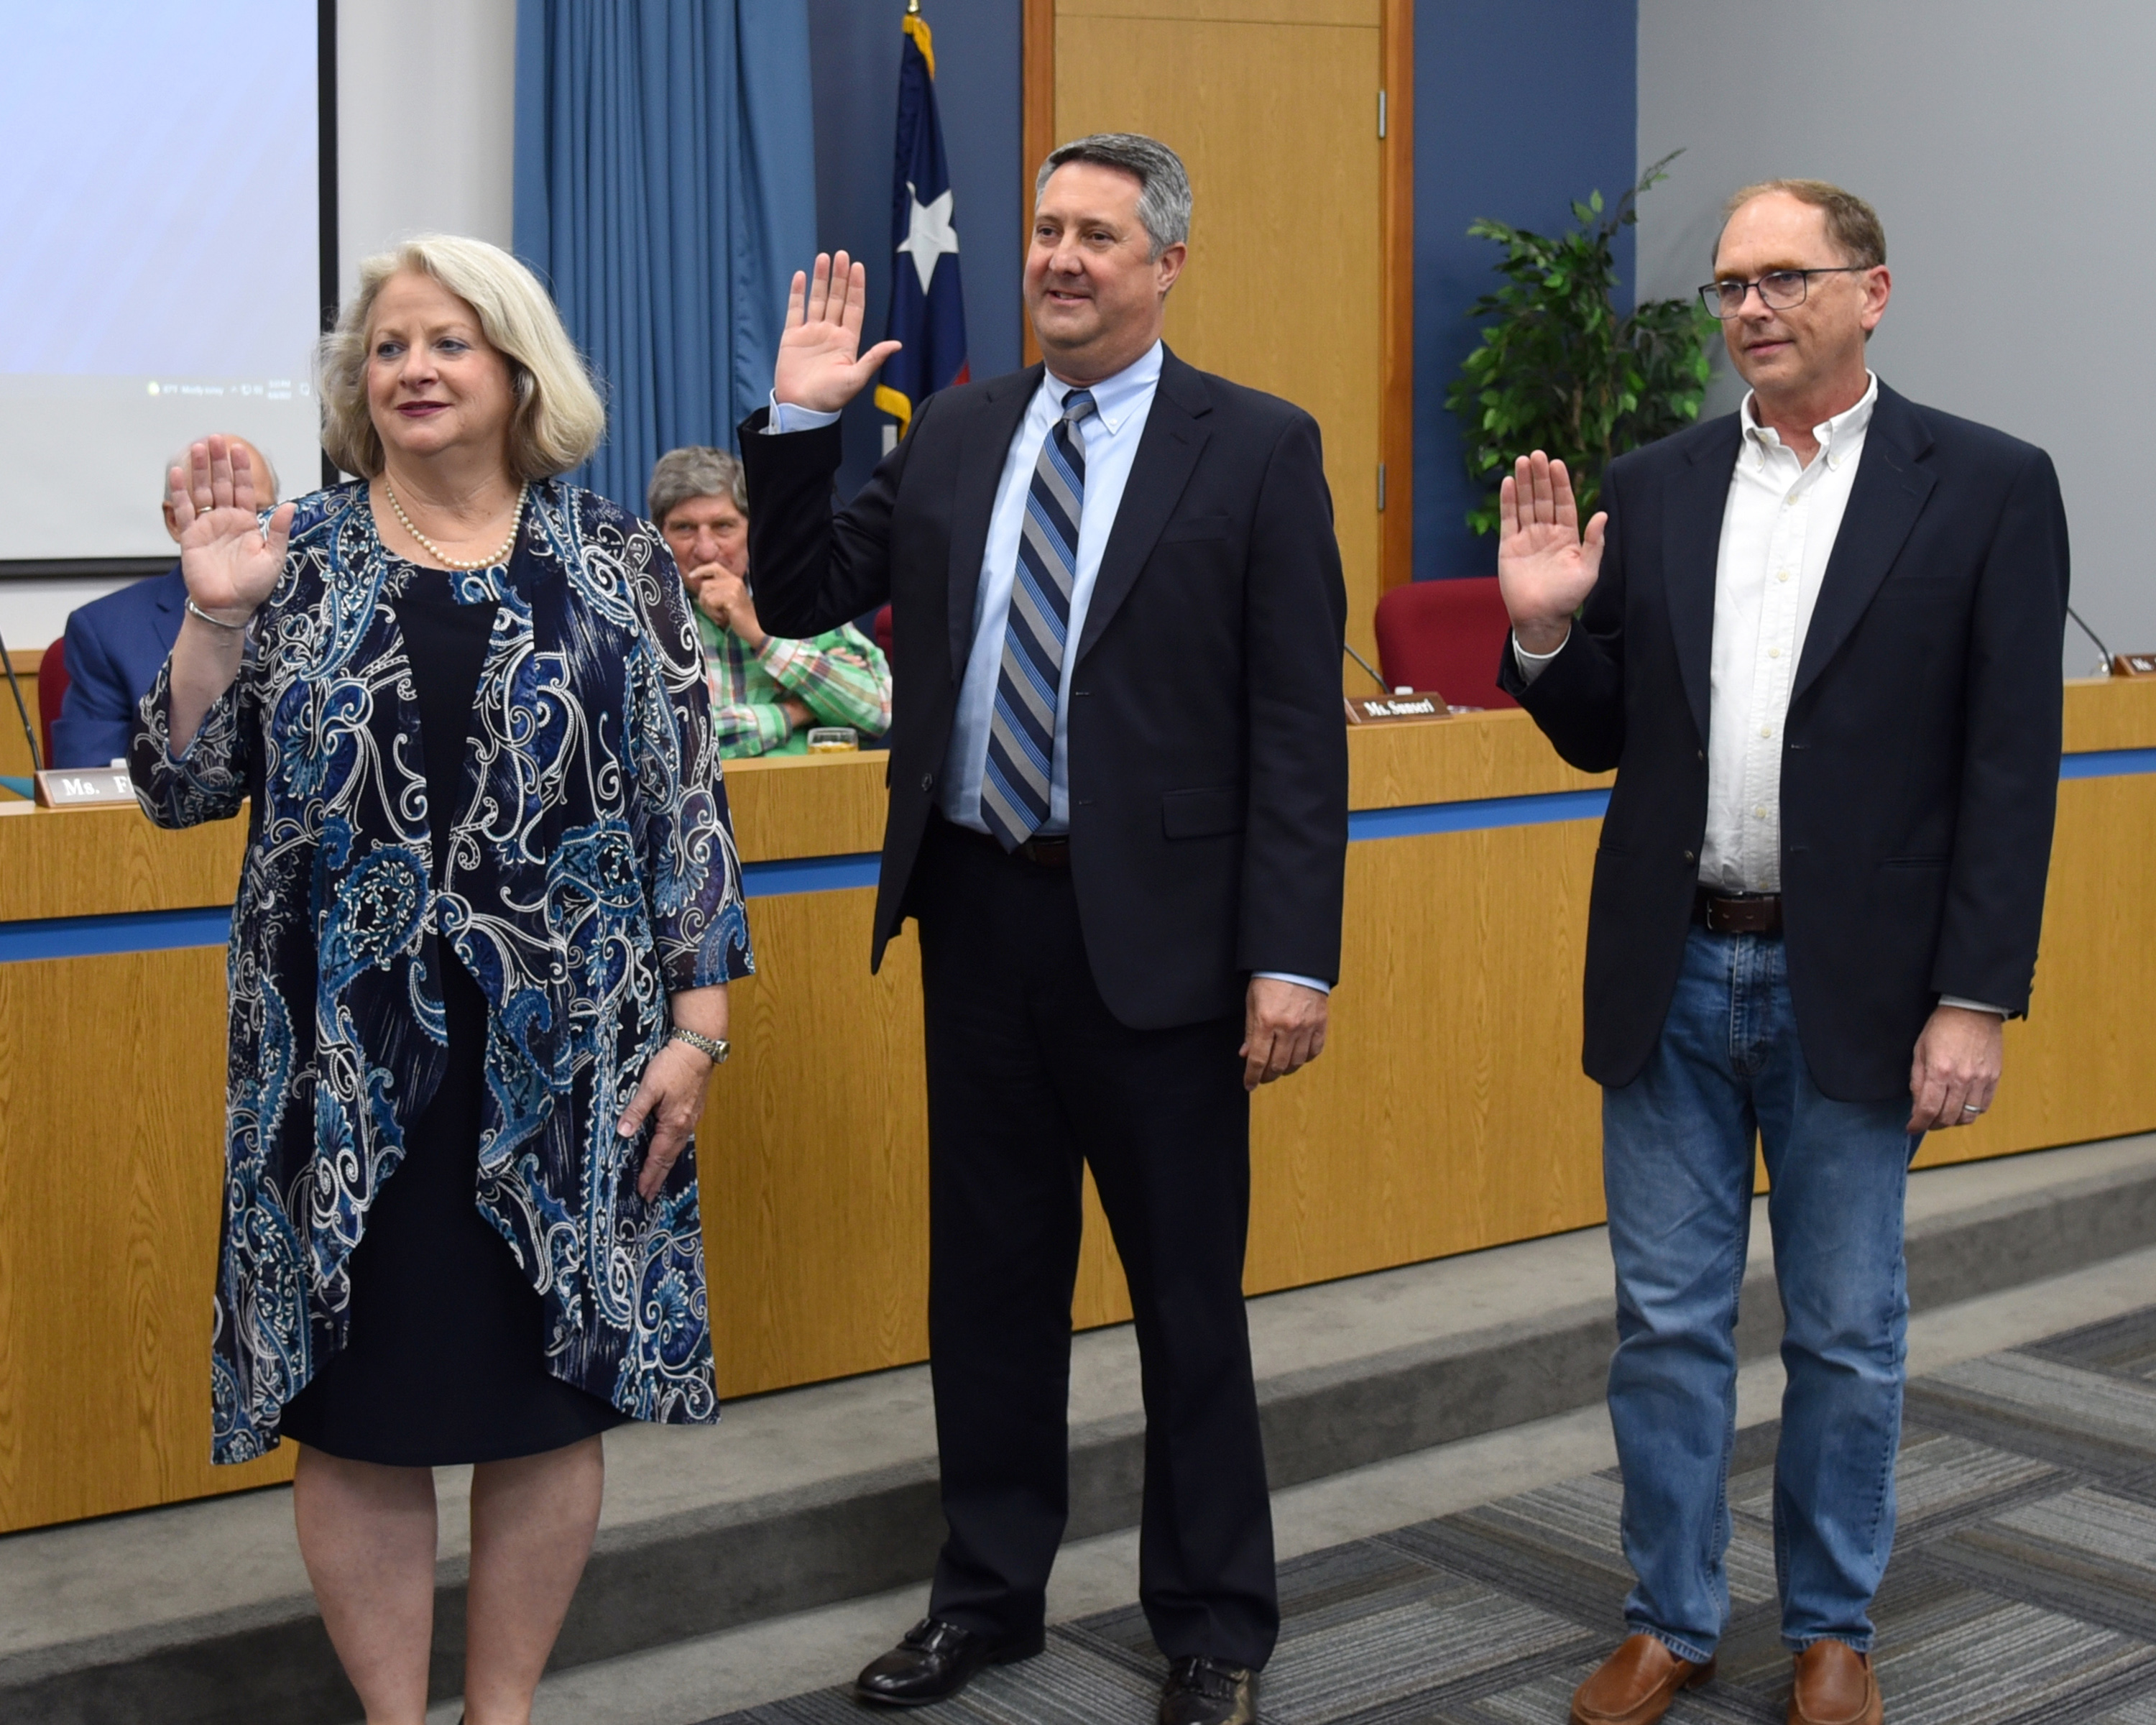 The new regents sworn into office are Carolyn L. Sunseri, Position 6, Norman S. Hoffman, Position 7 and Garrik Addison, Position 8.